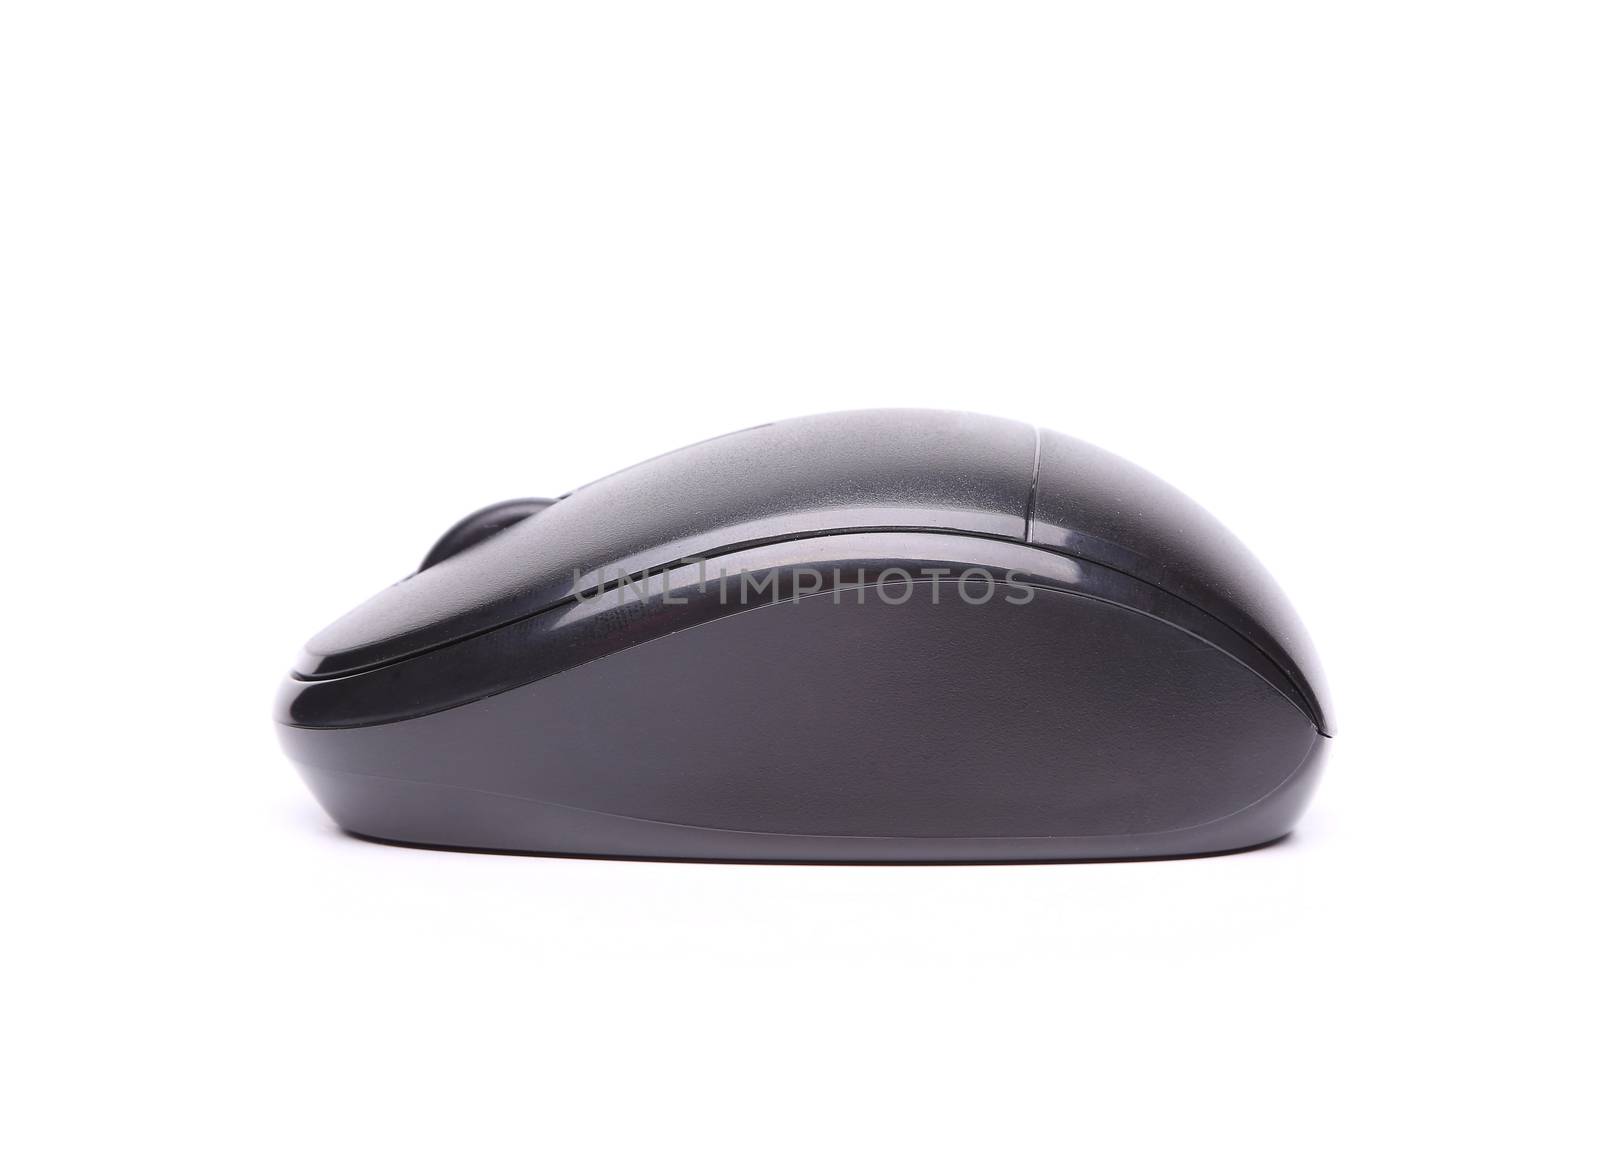 Wireless computer mouse isolated on white background flank by indigolotos